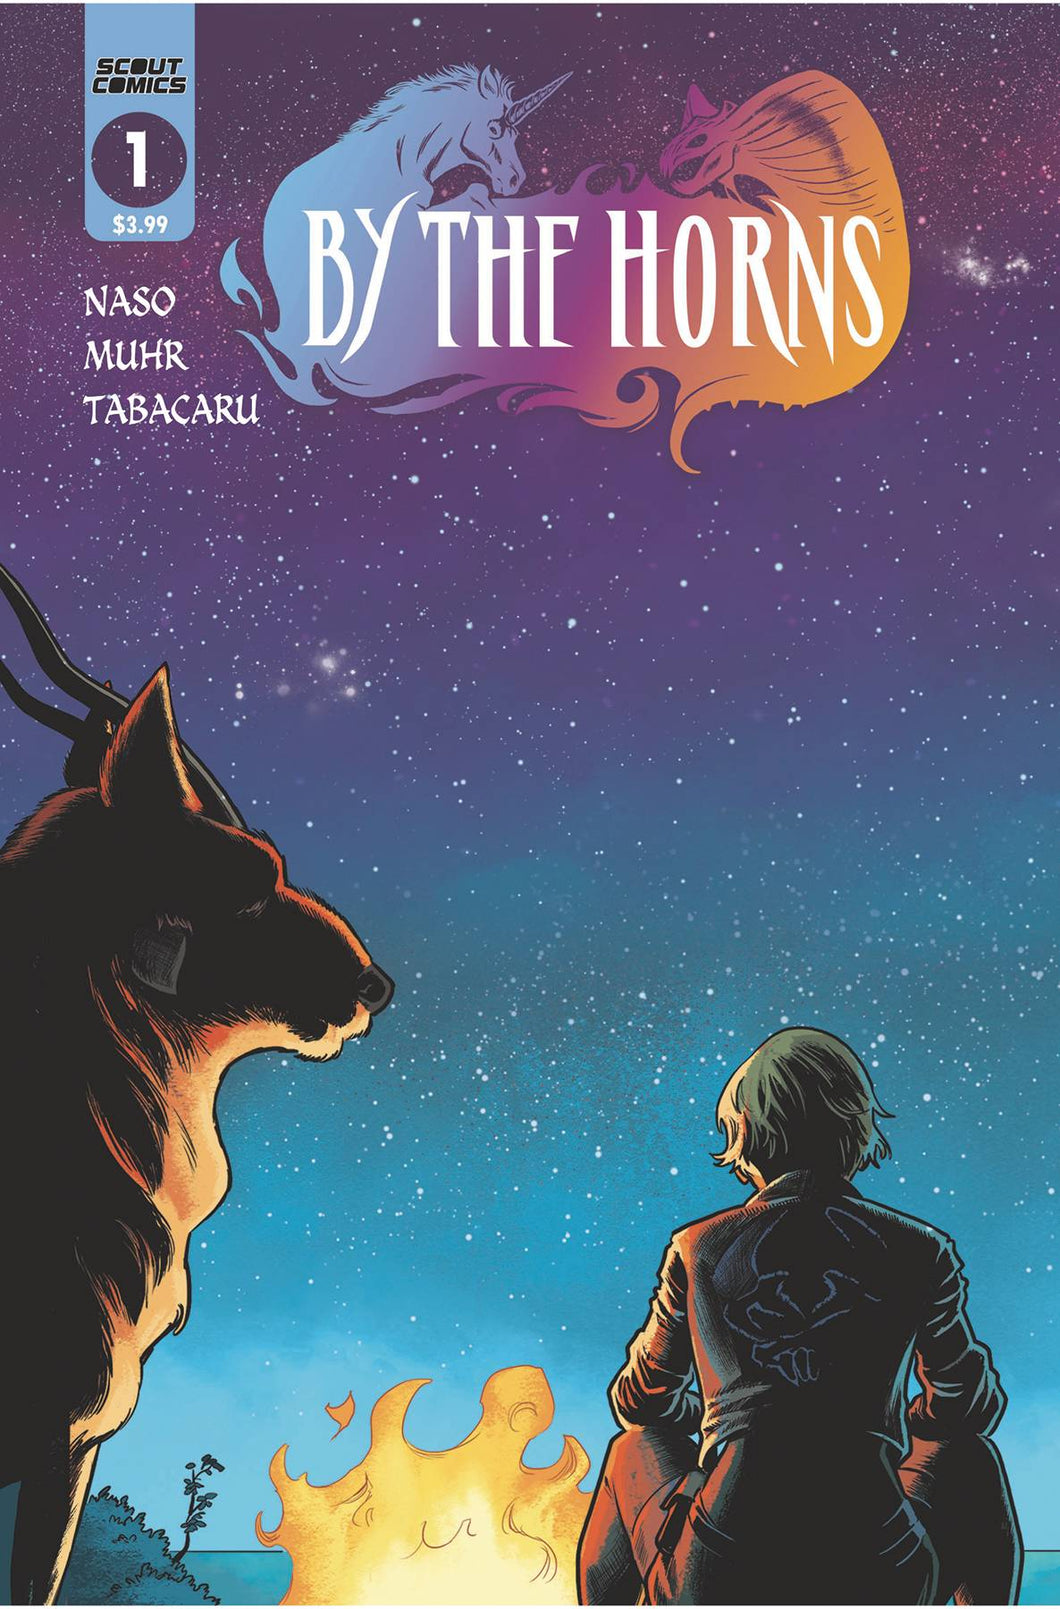 By The Horns #1 (Cover - 2nd Print)